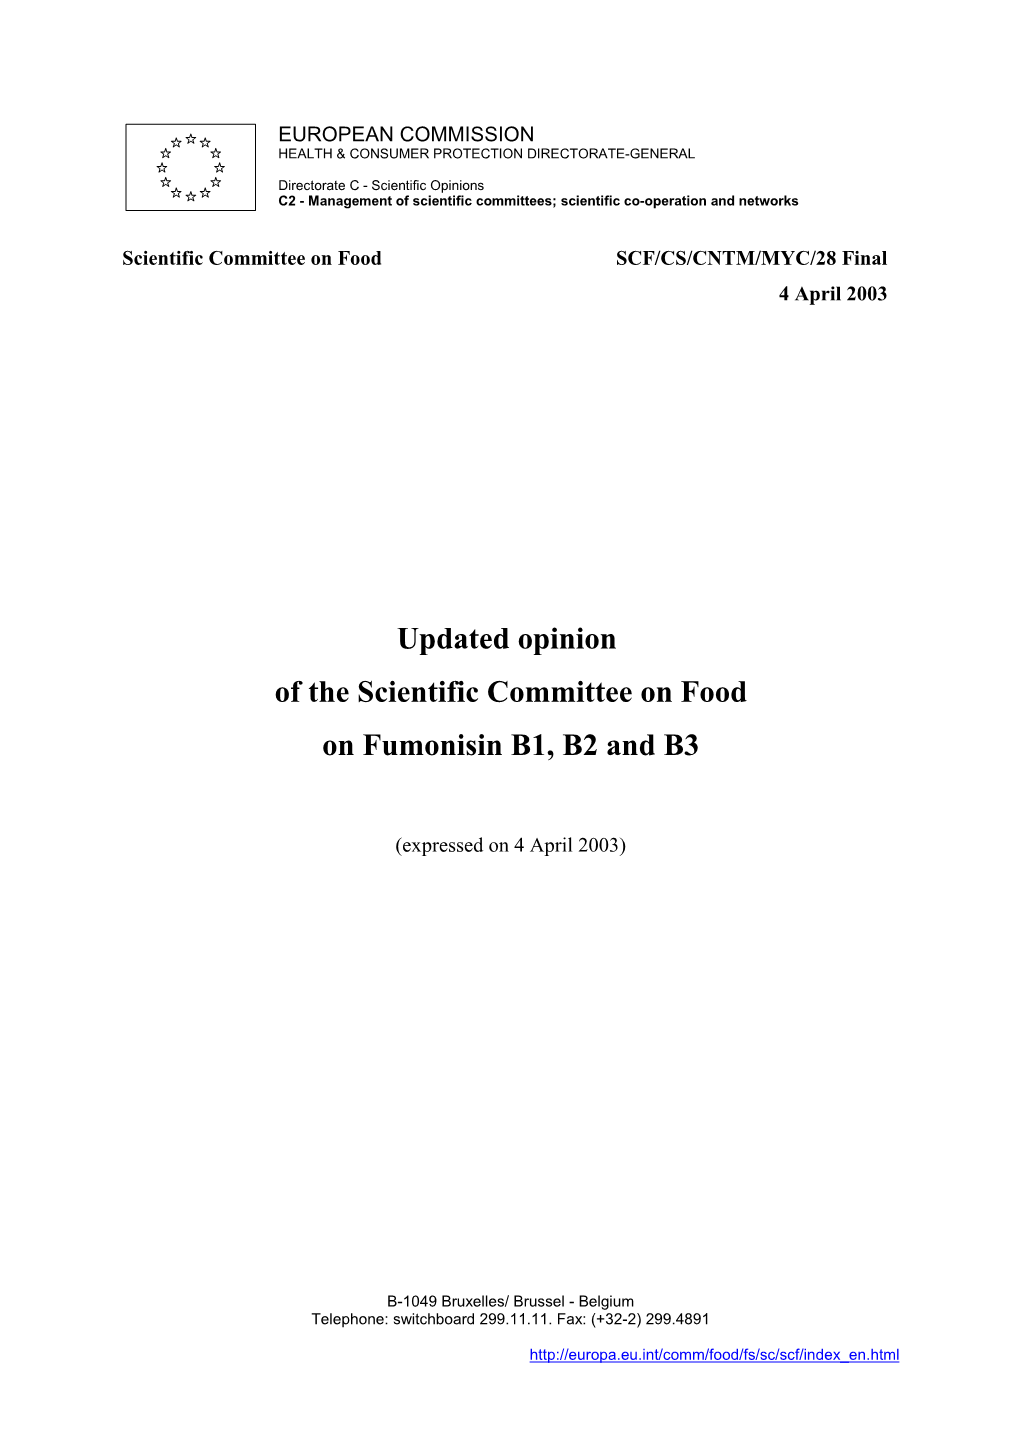 Updated Opinion of the Scientific Committee on Food on Fumonisin B1, B2 and B3